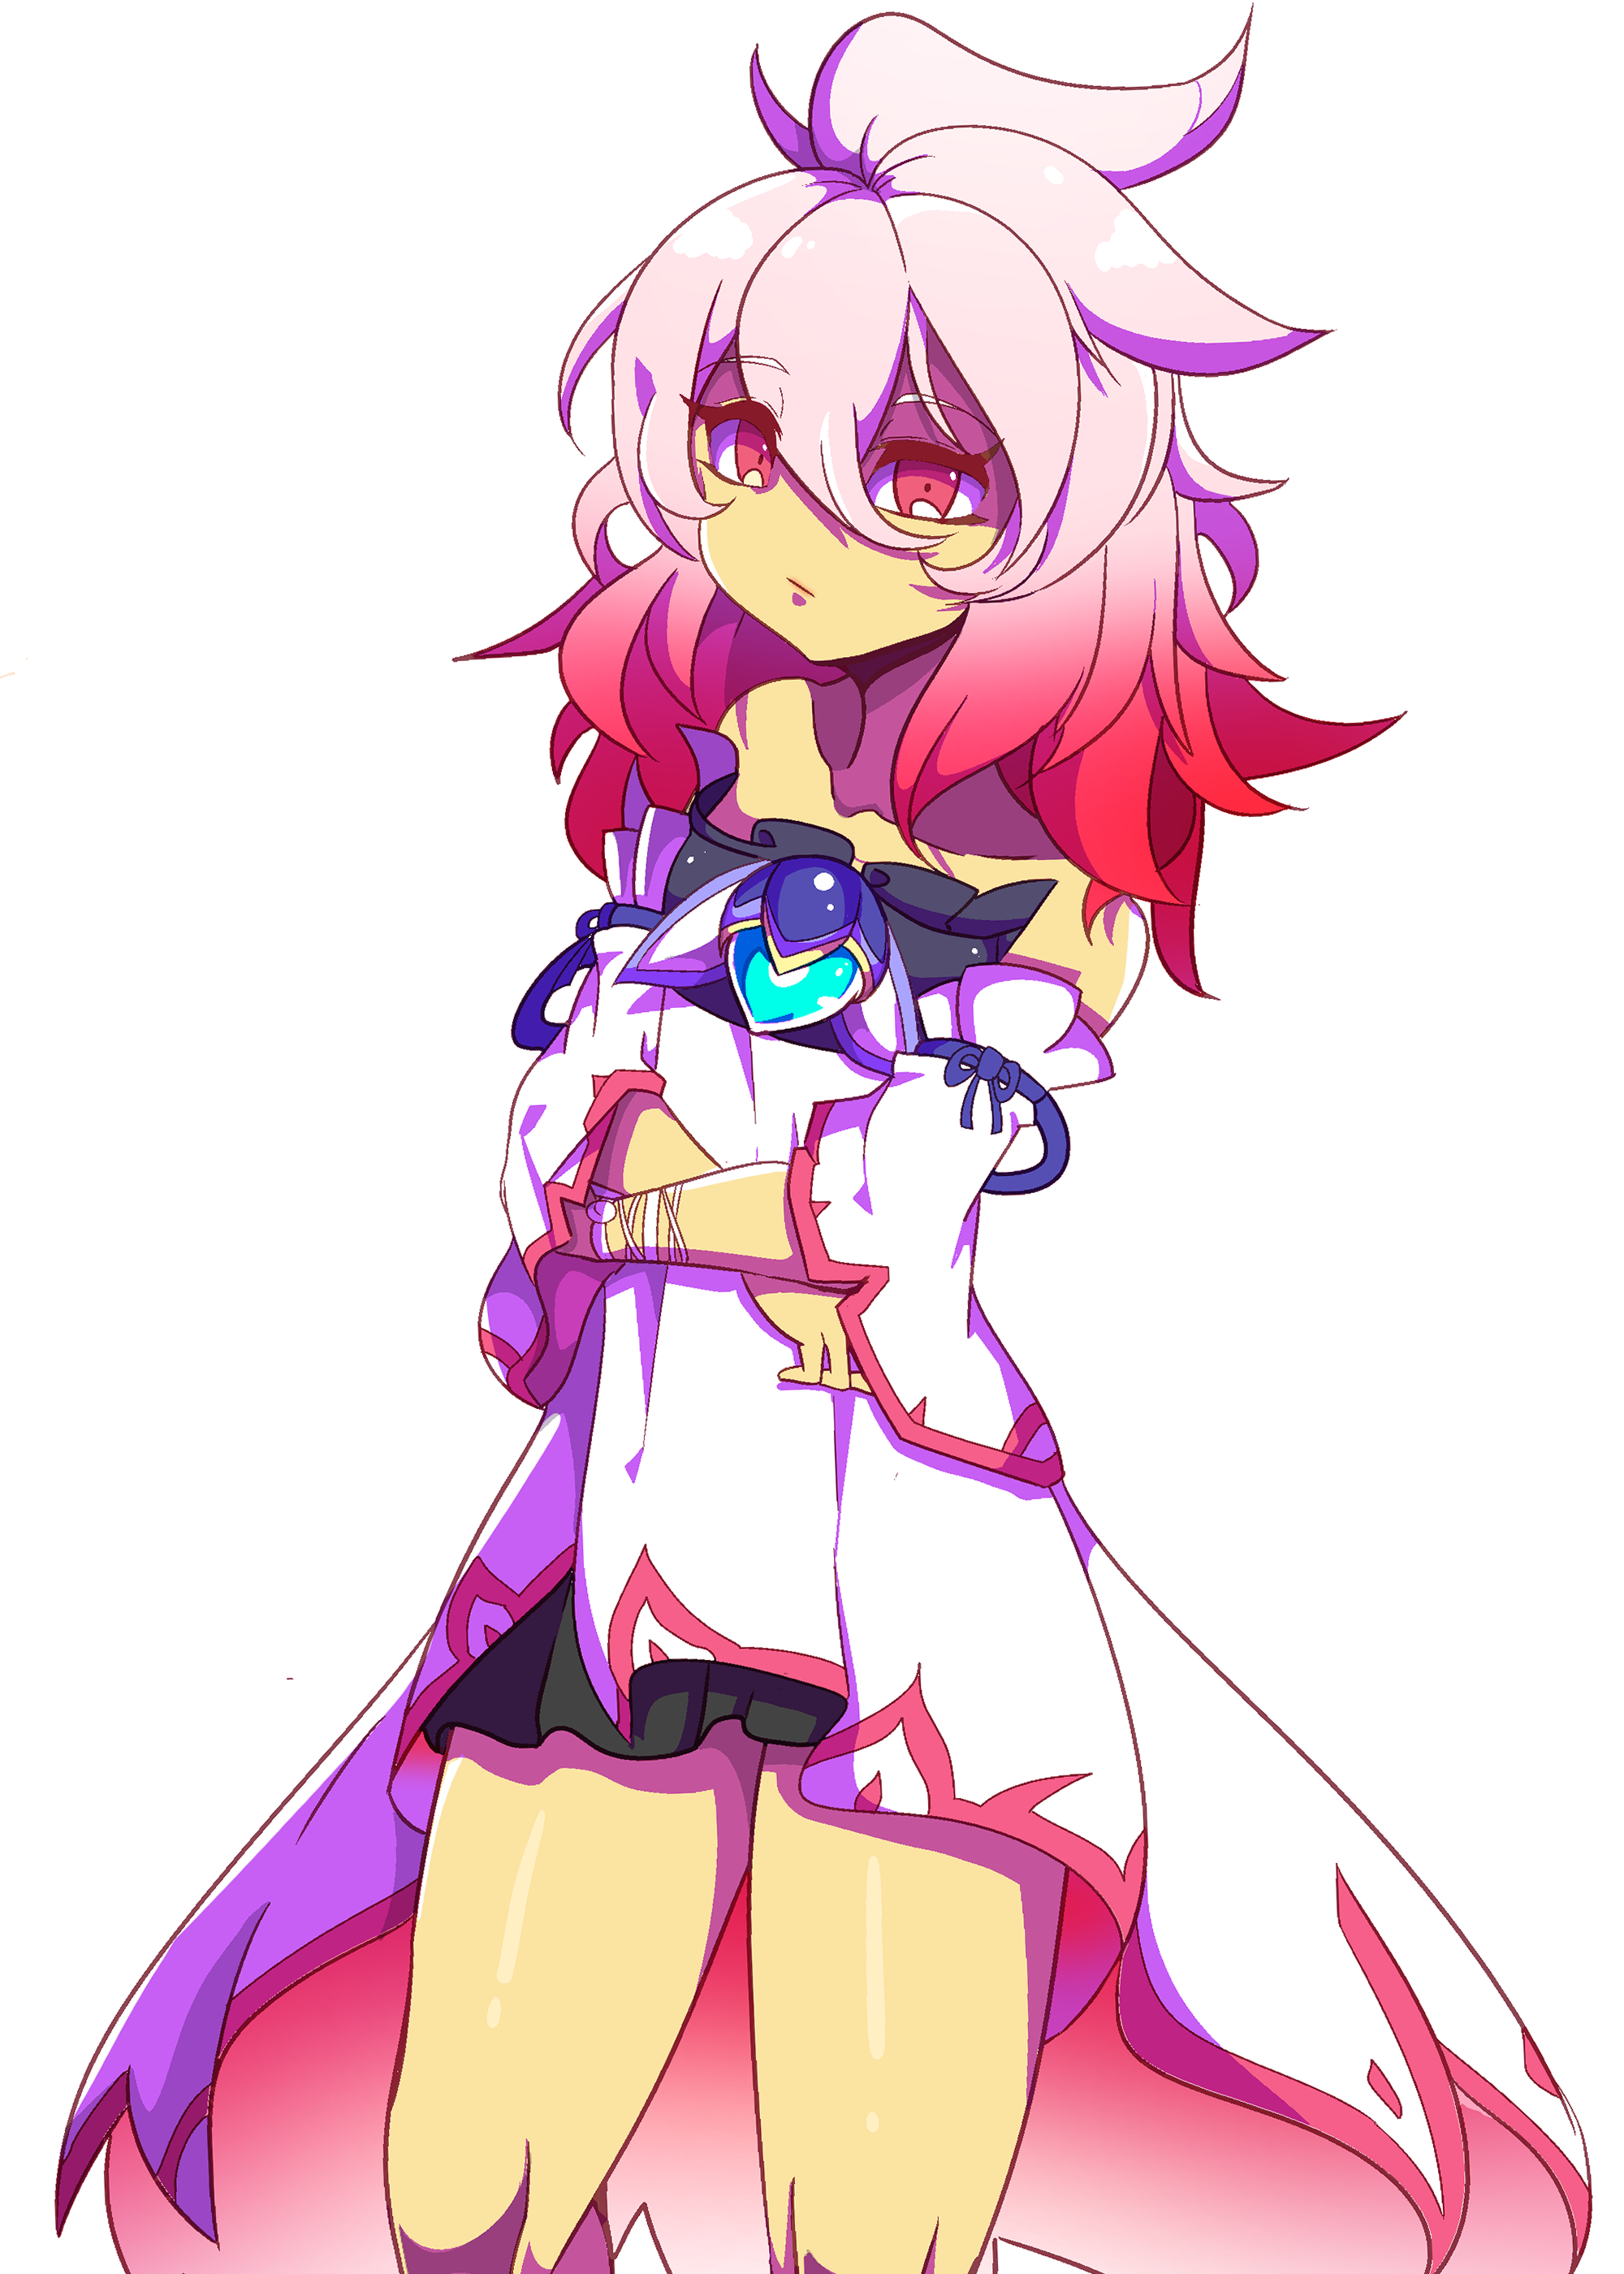 Elsword Laby